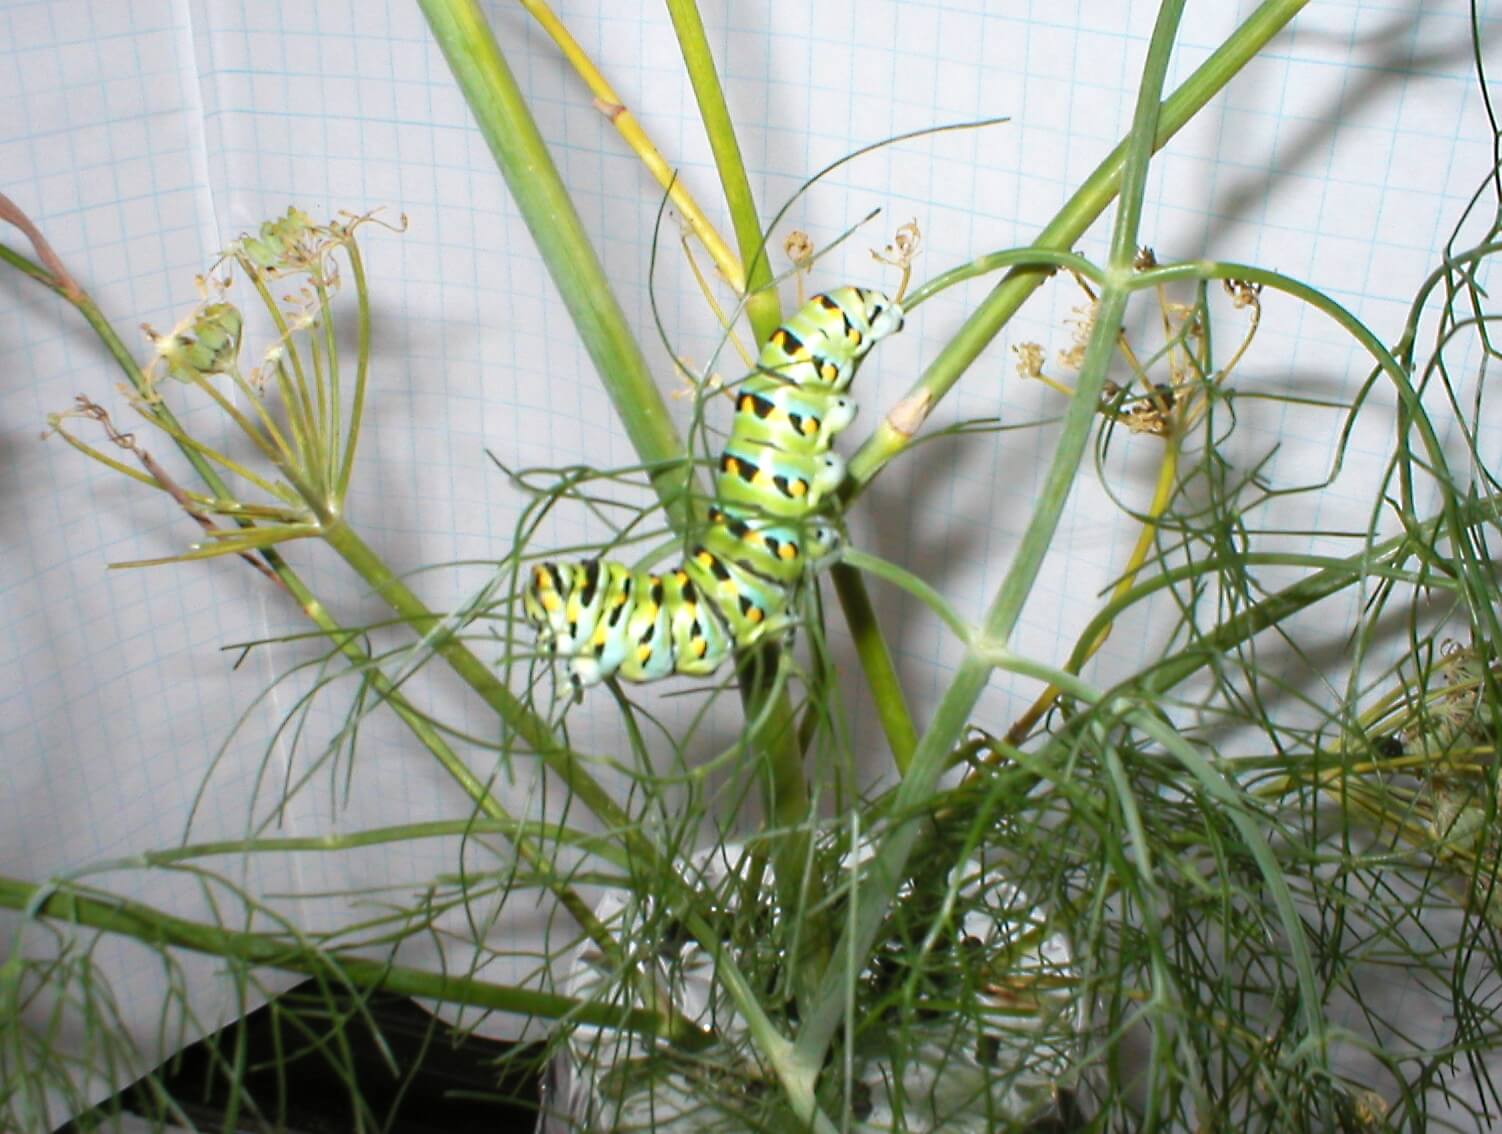 The larvae of the Anise Swallowtail butterfly prefer plants in the fennel family